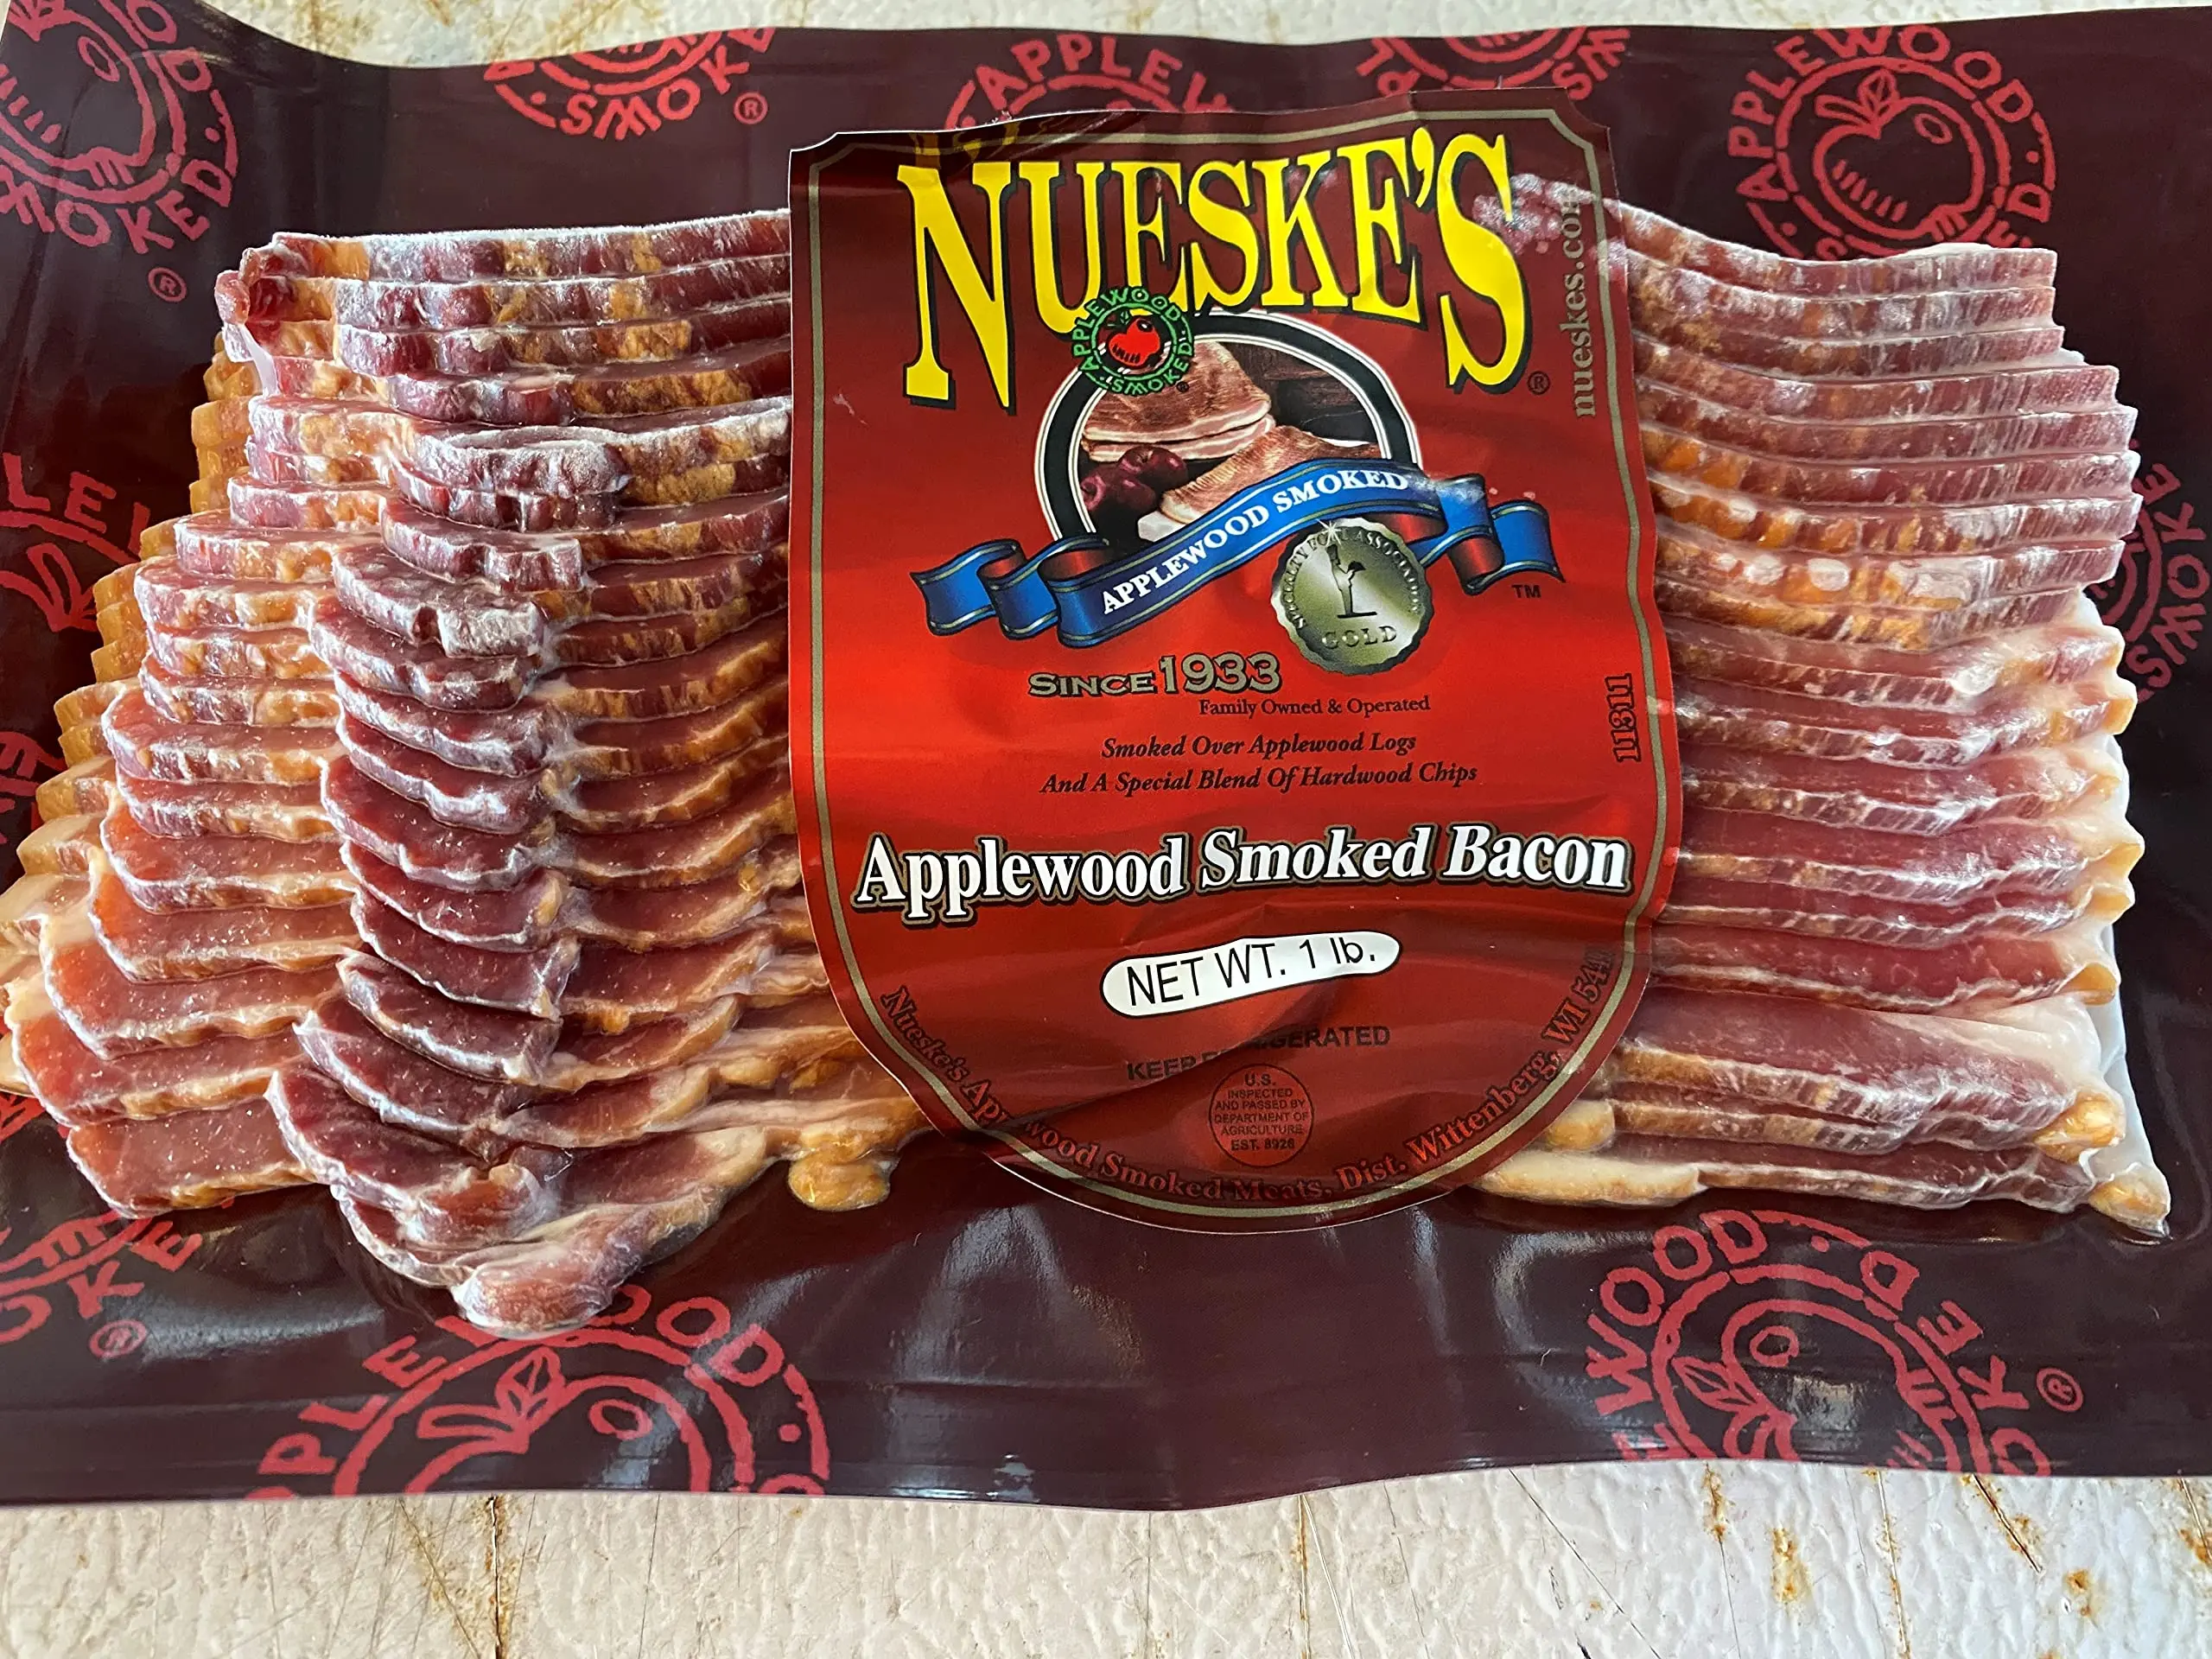 nueske's applewood smoked meats - Where did Nueske's bacon come from